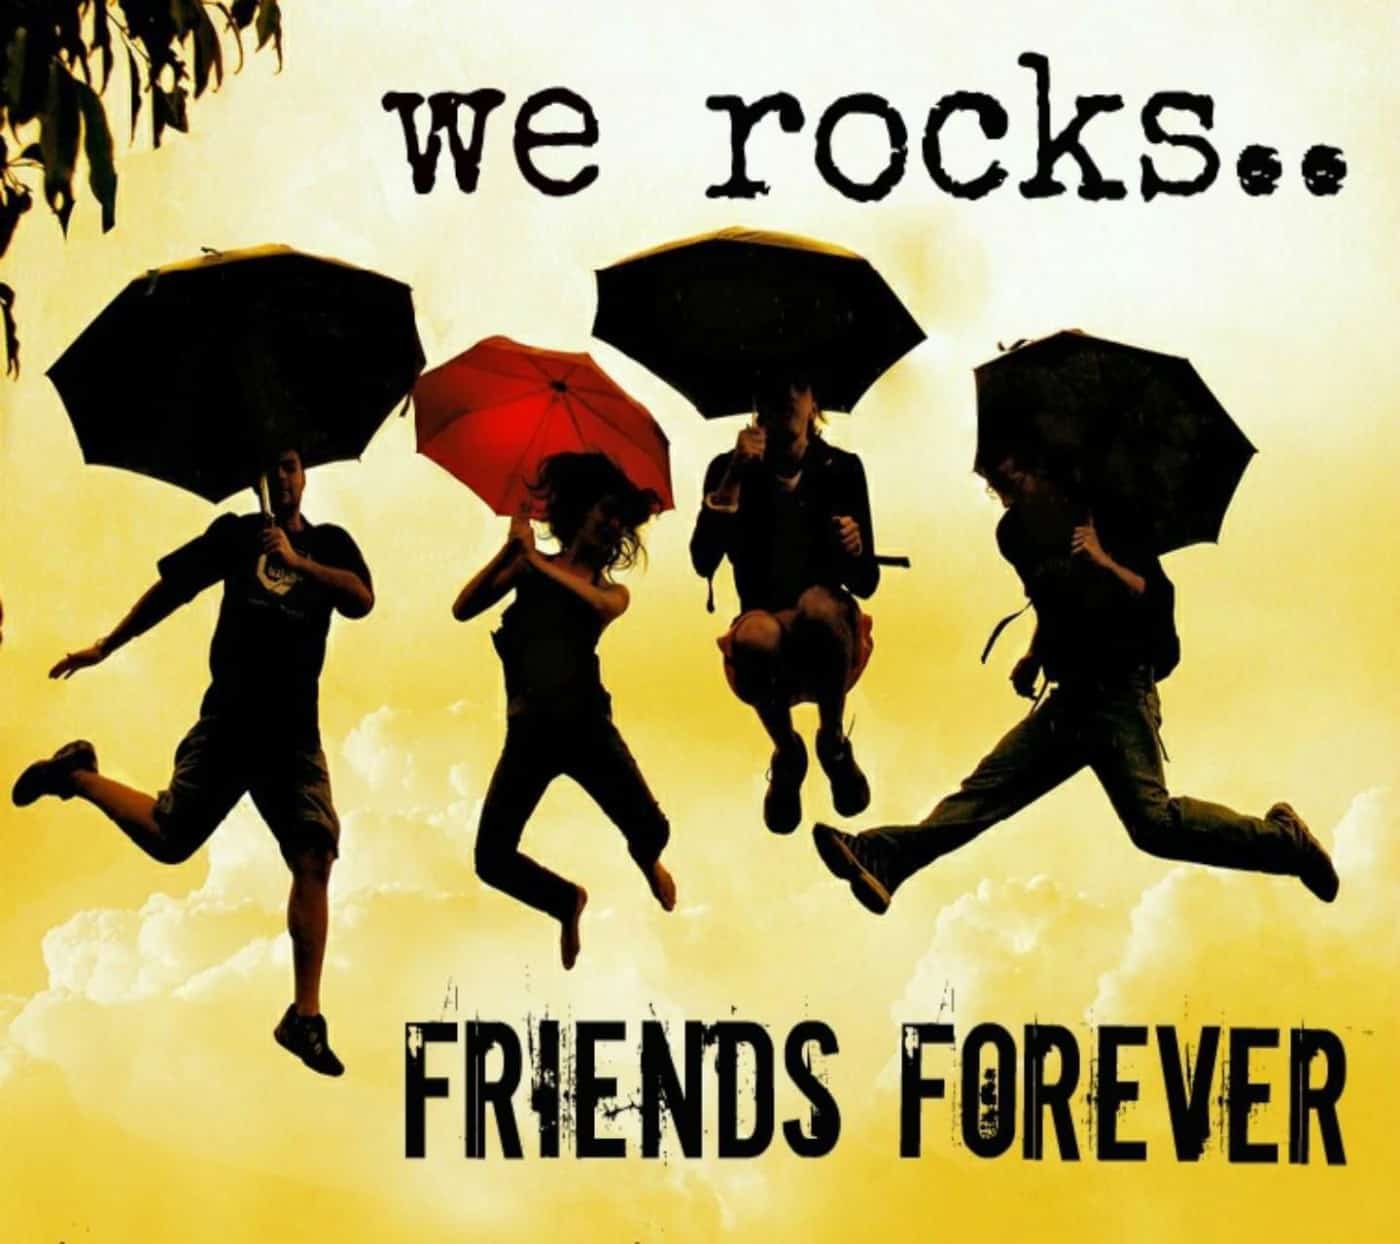 Friends Forever Wallpapers For Mobile - Wallpaper Cave